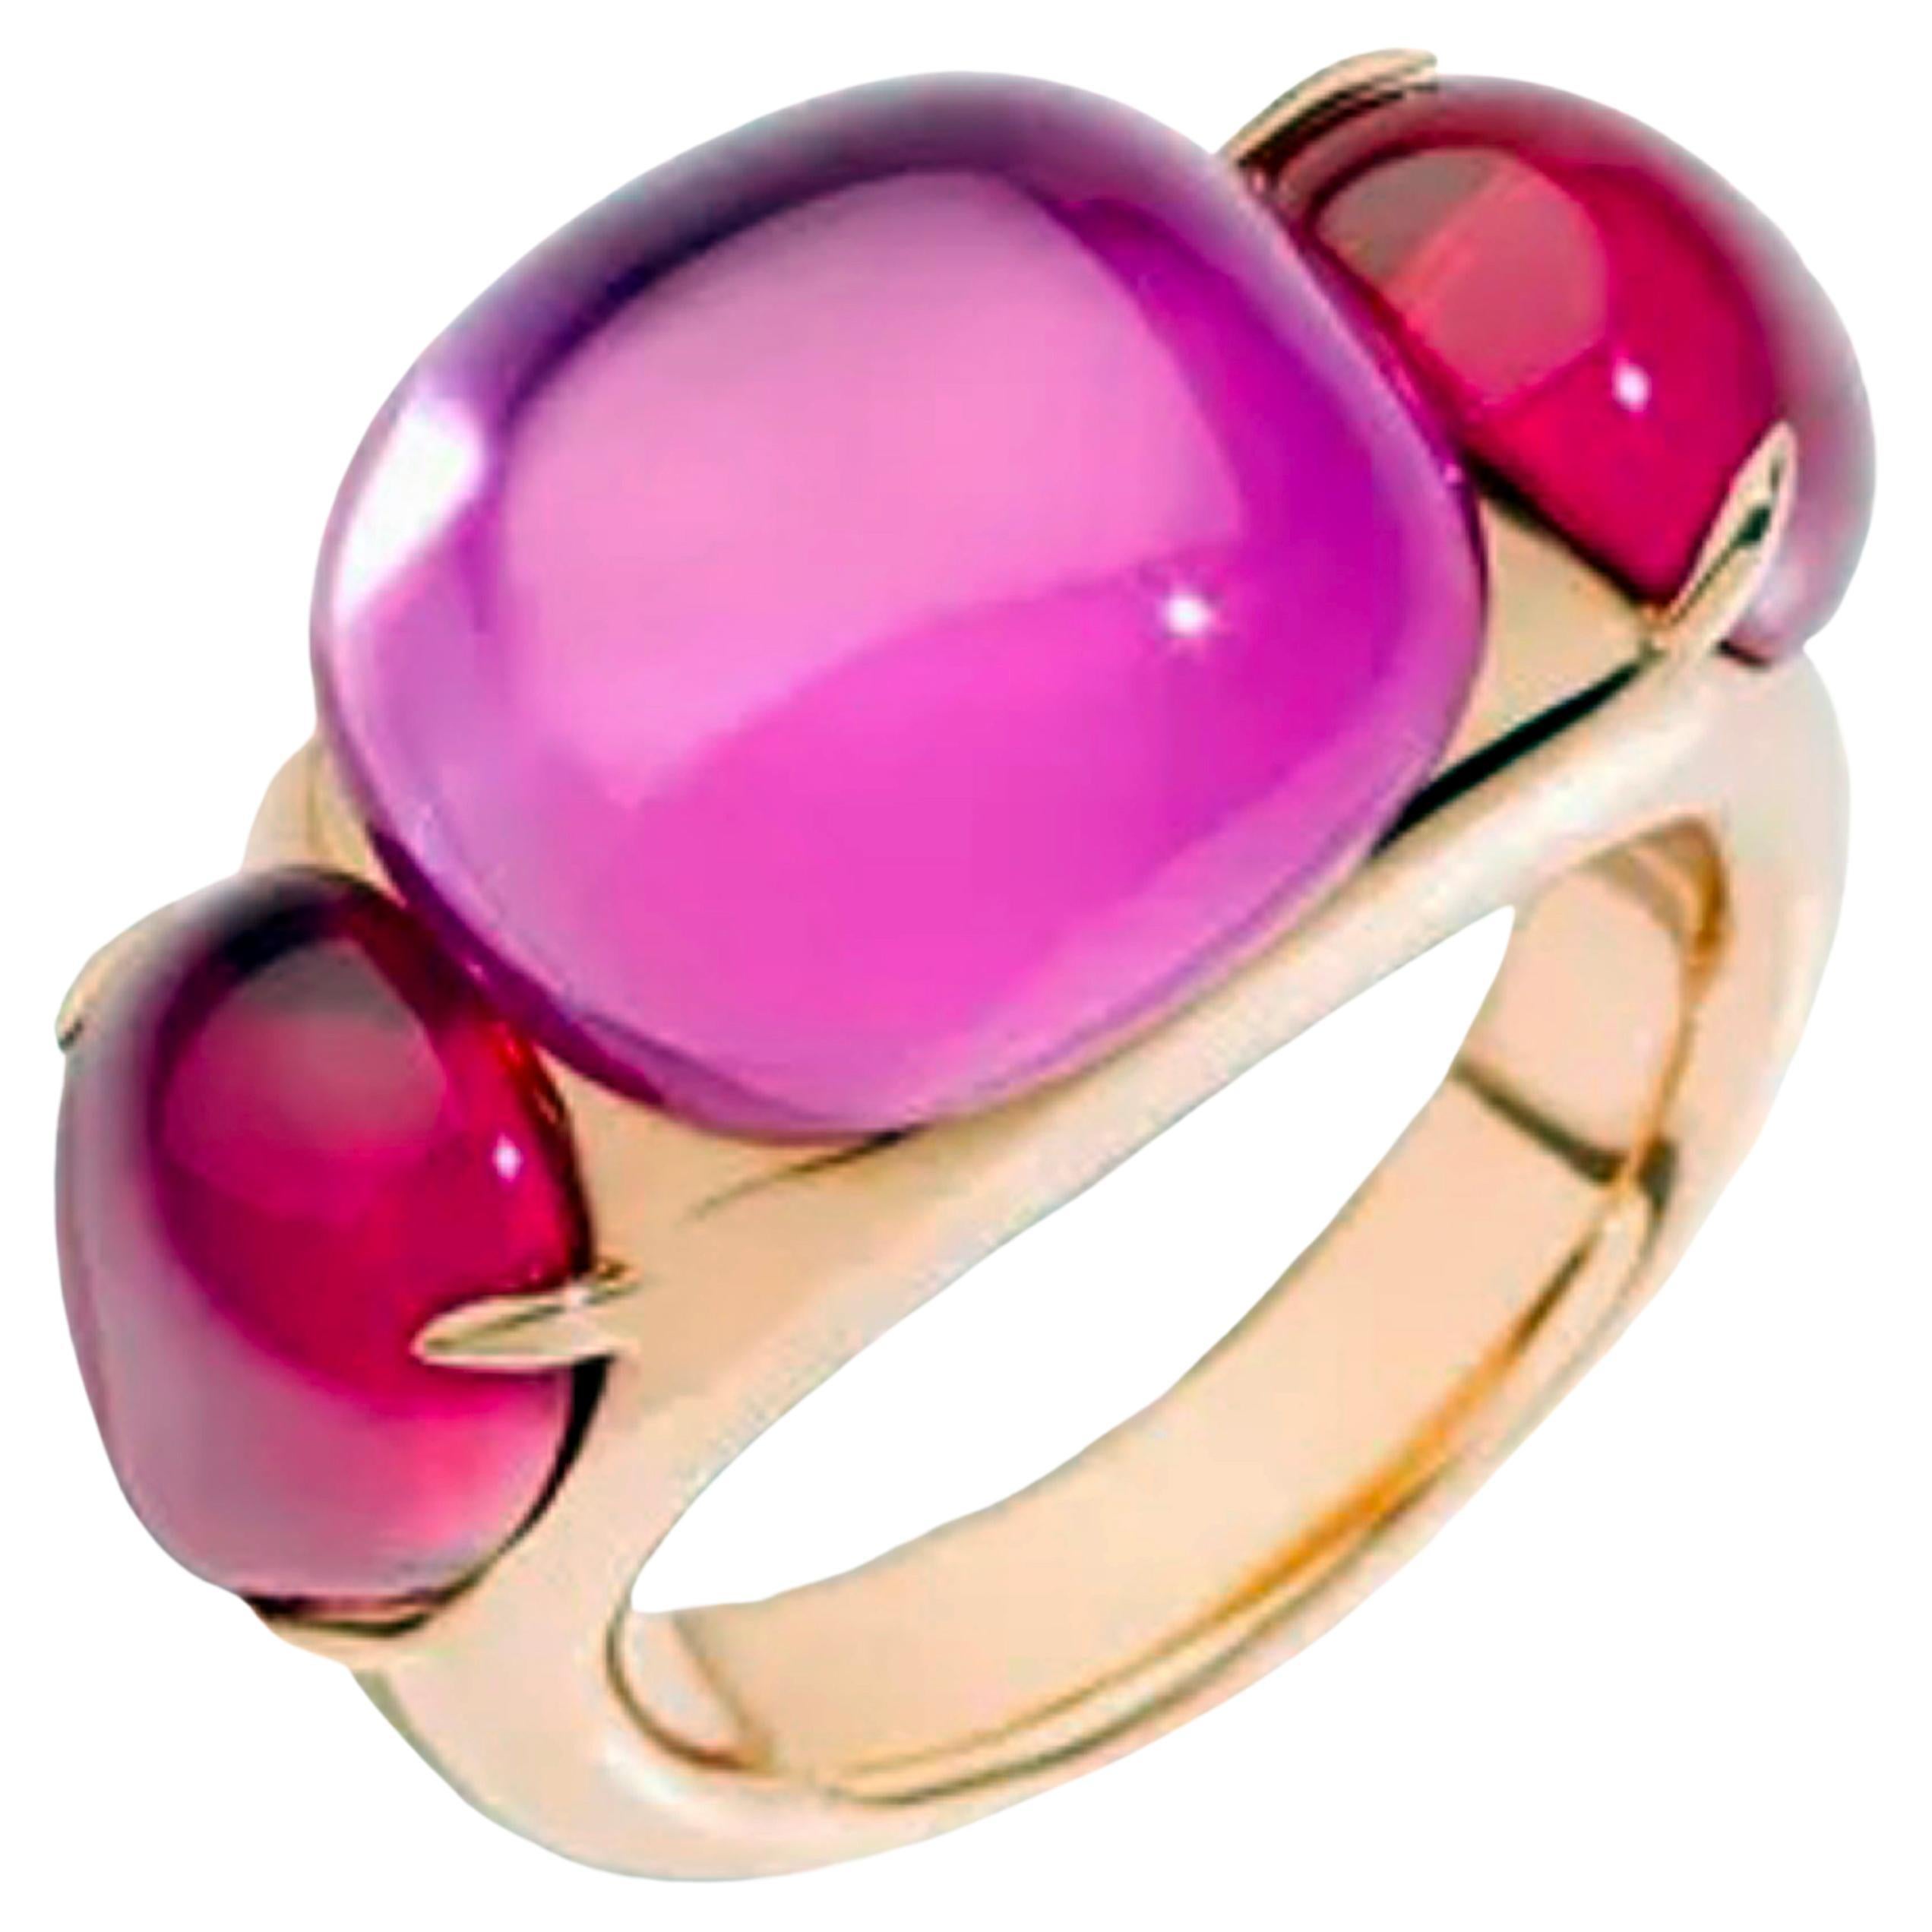 Original 2013 Pomellato Rouge Passion Pink Sapphire Rose Gold Cocktail Ring